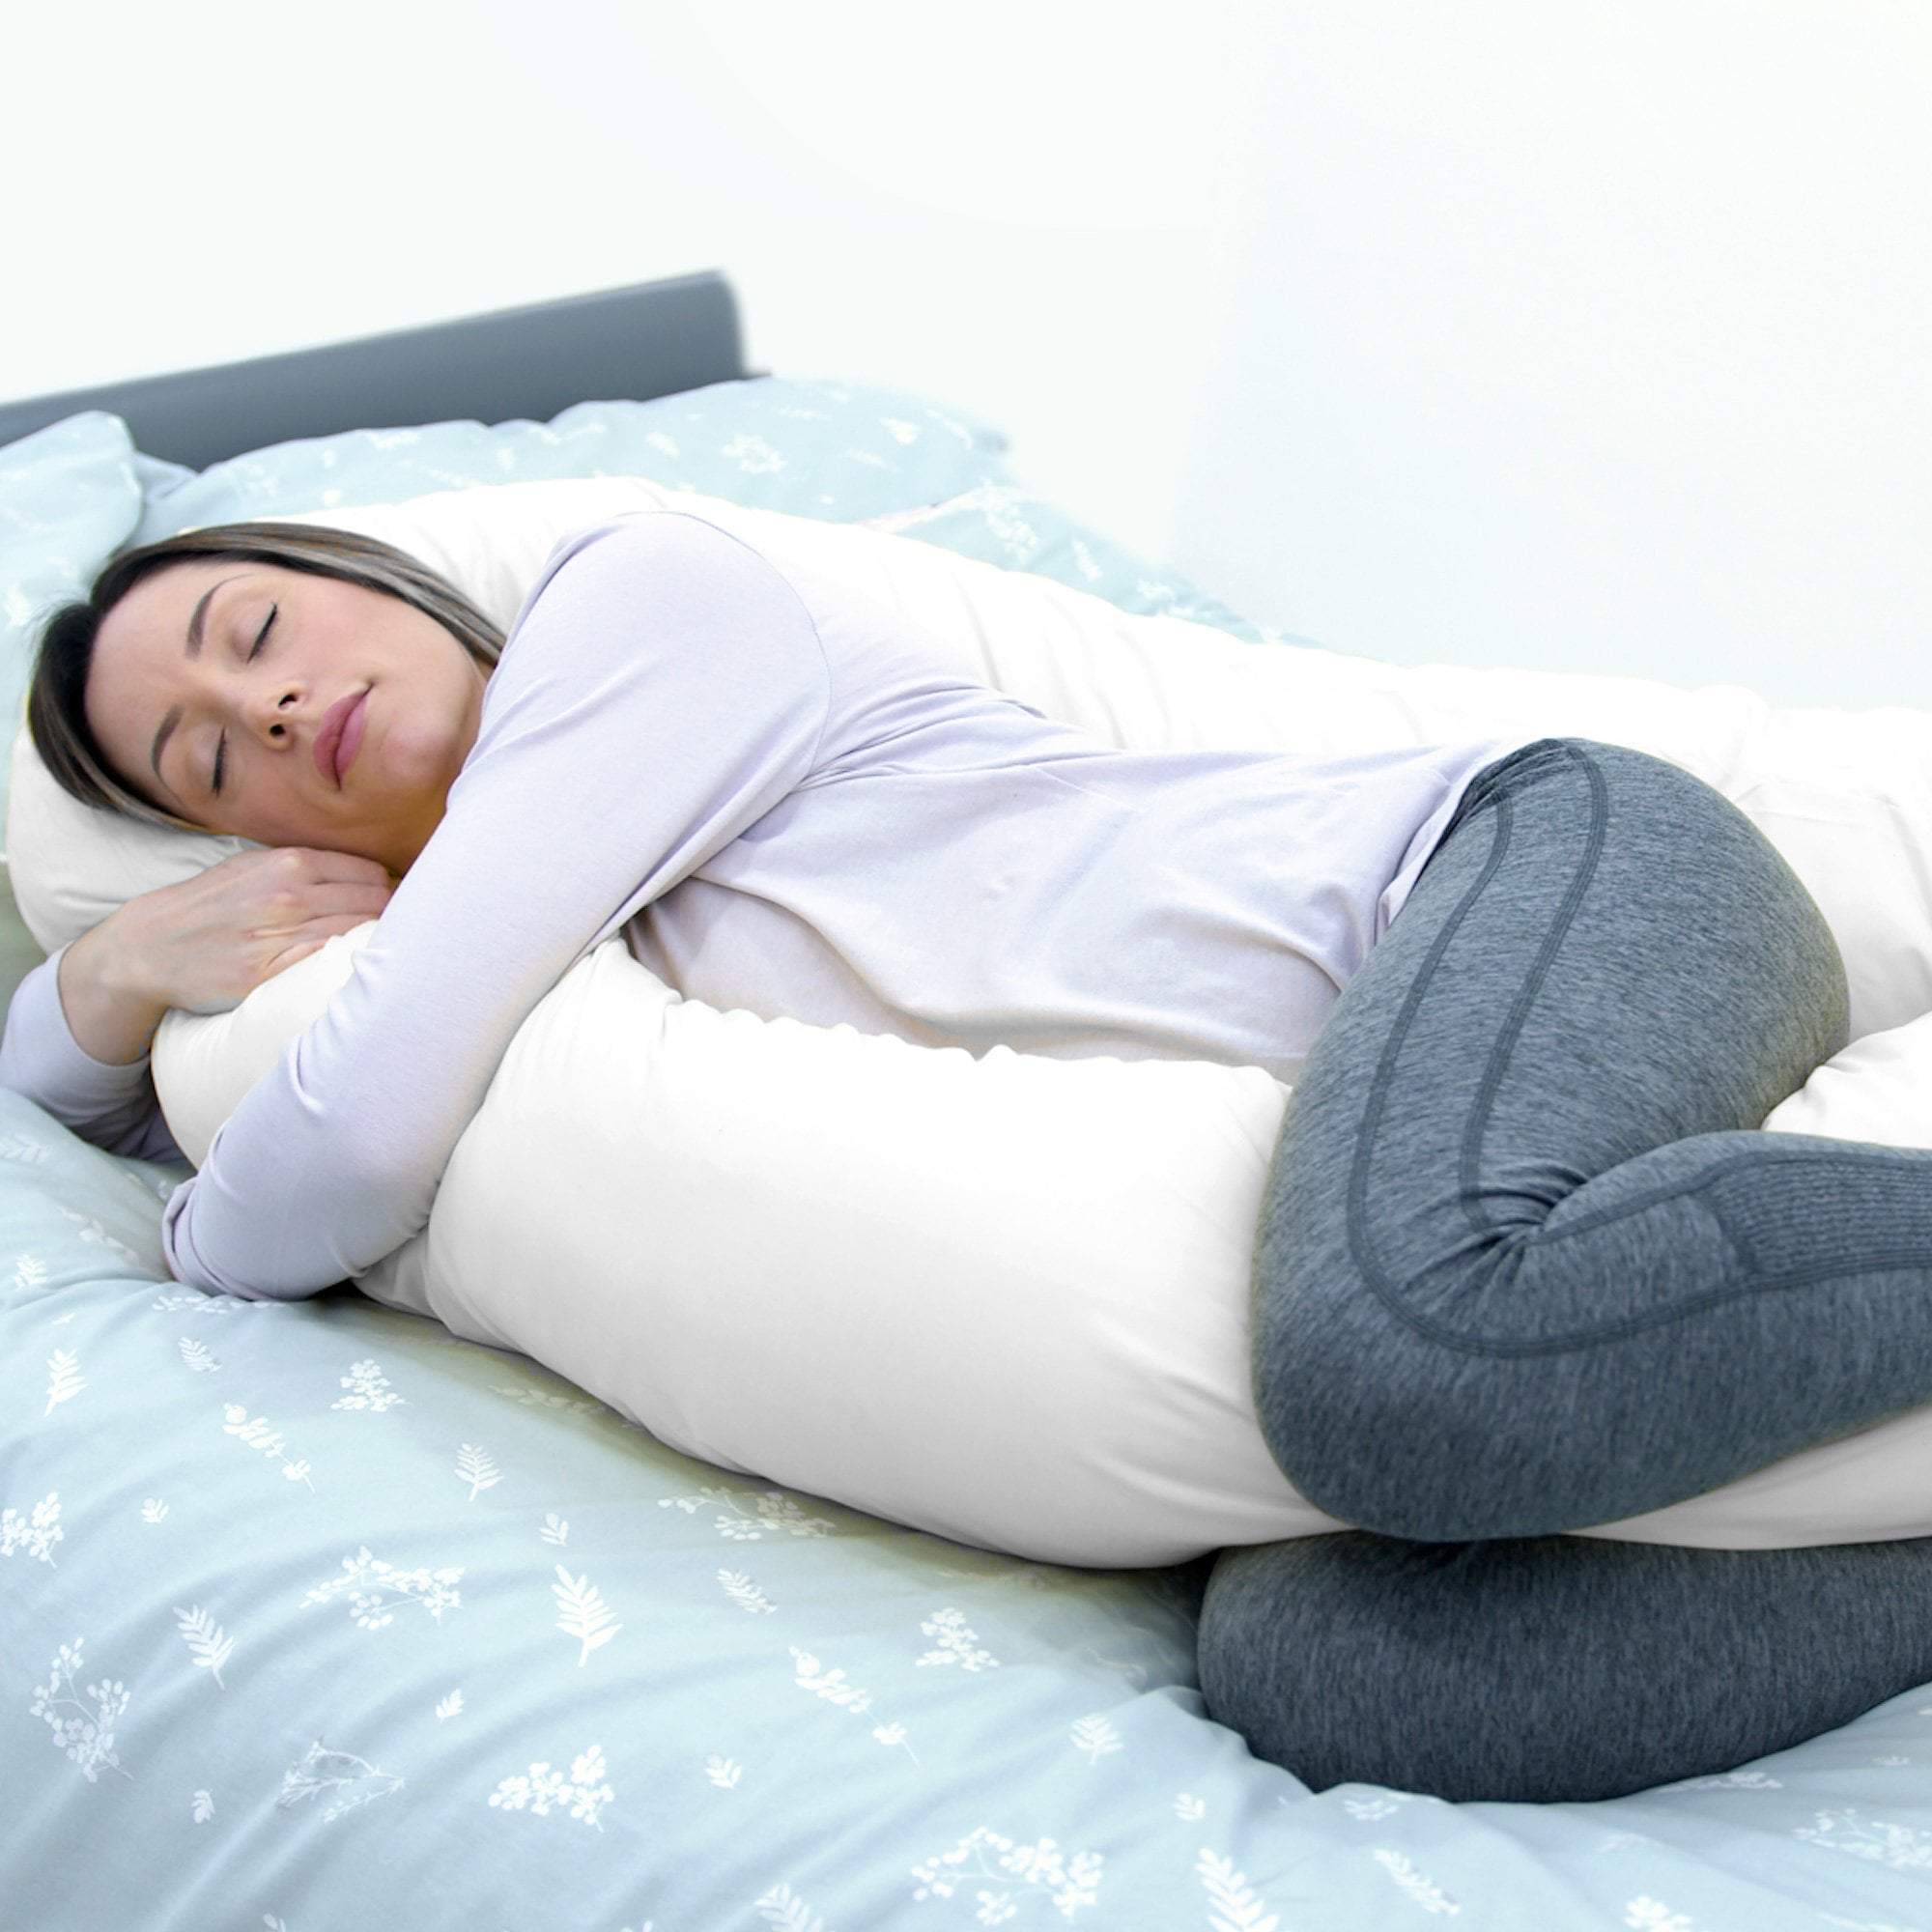 9 ft Maternity Pregnancy Pillow With Case - White - For Your Little One